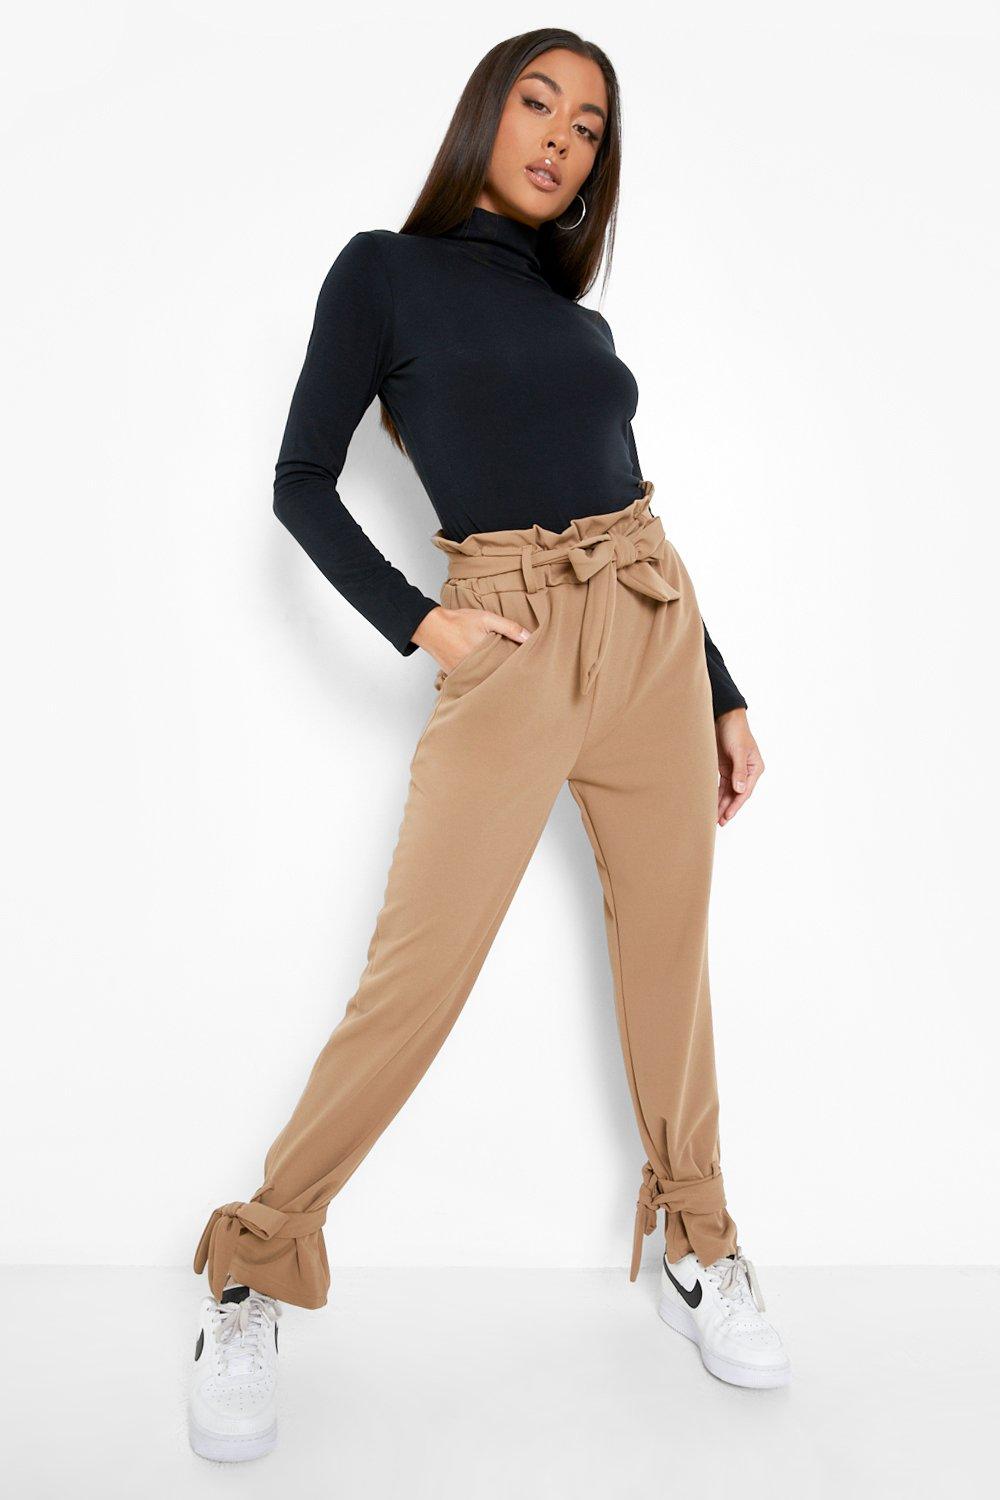 Women's Formal Belted Trousers, Taper & Tie Front Trousers